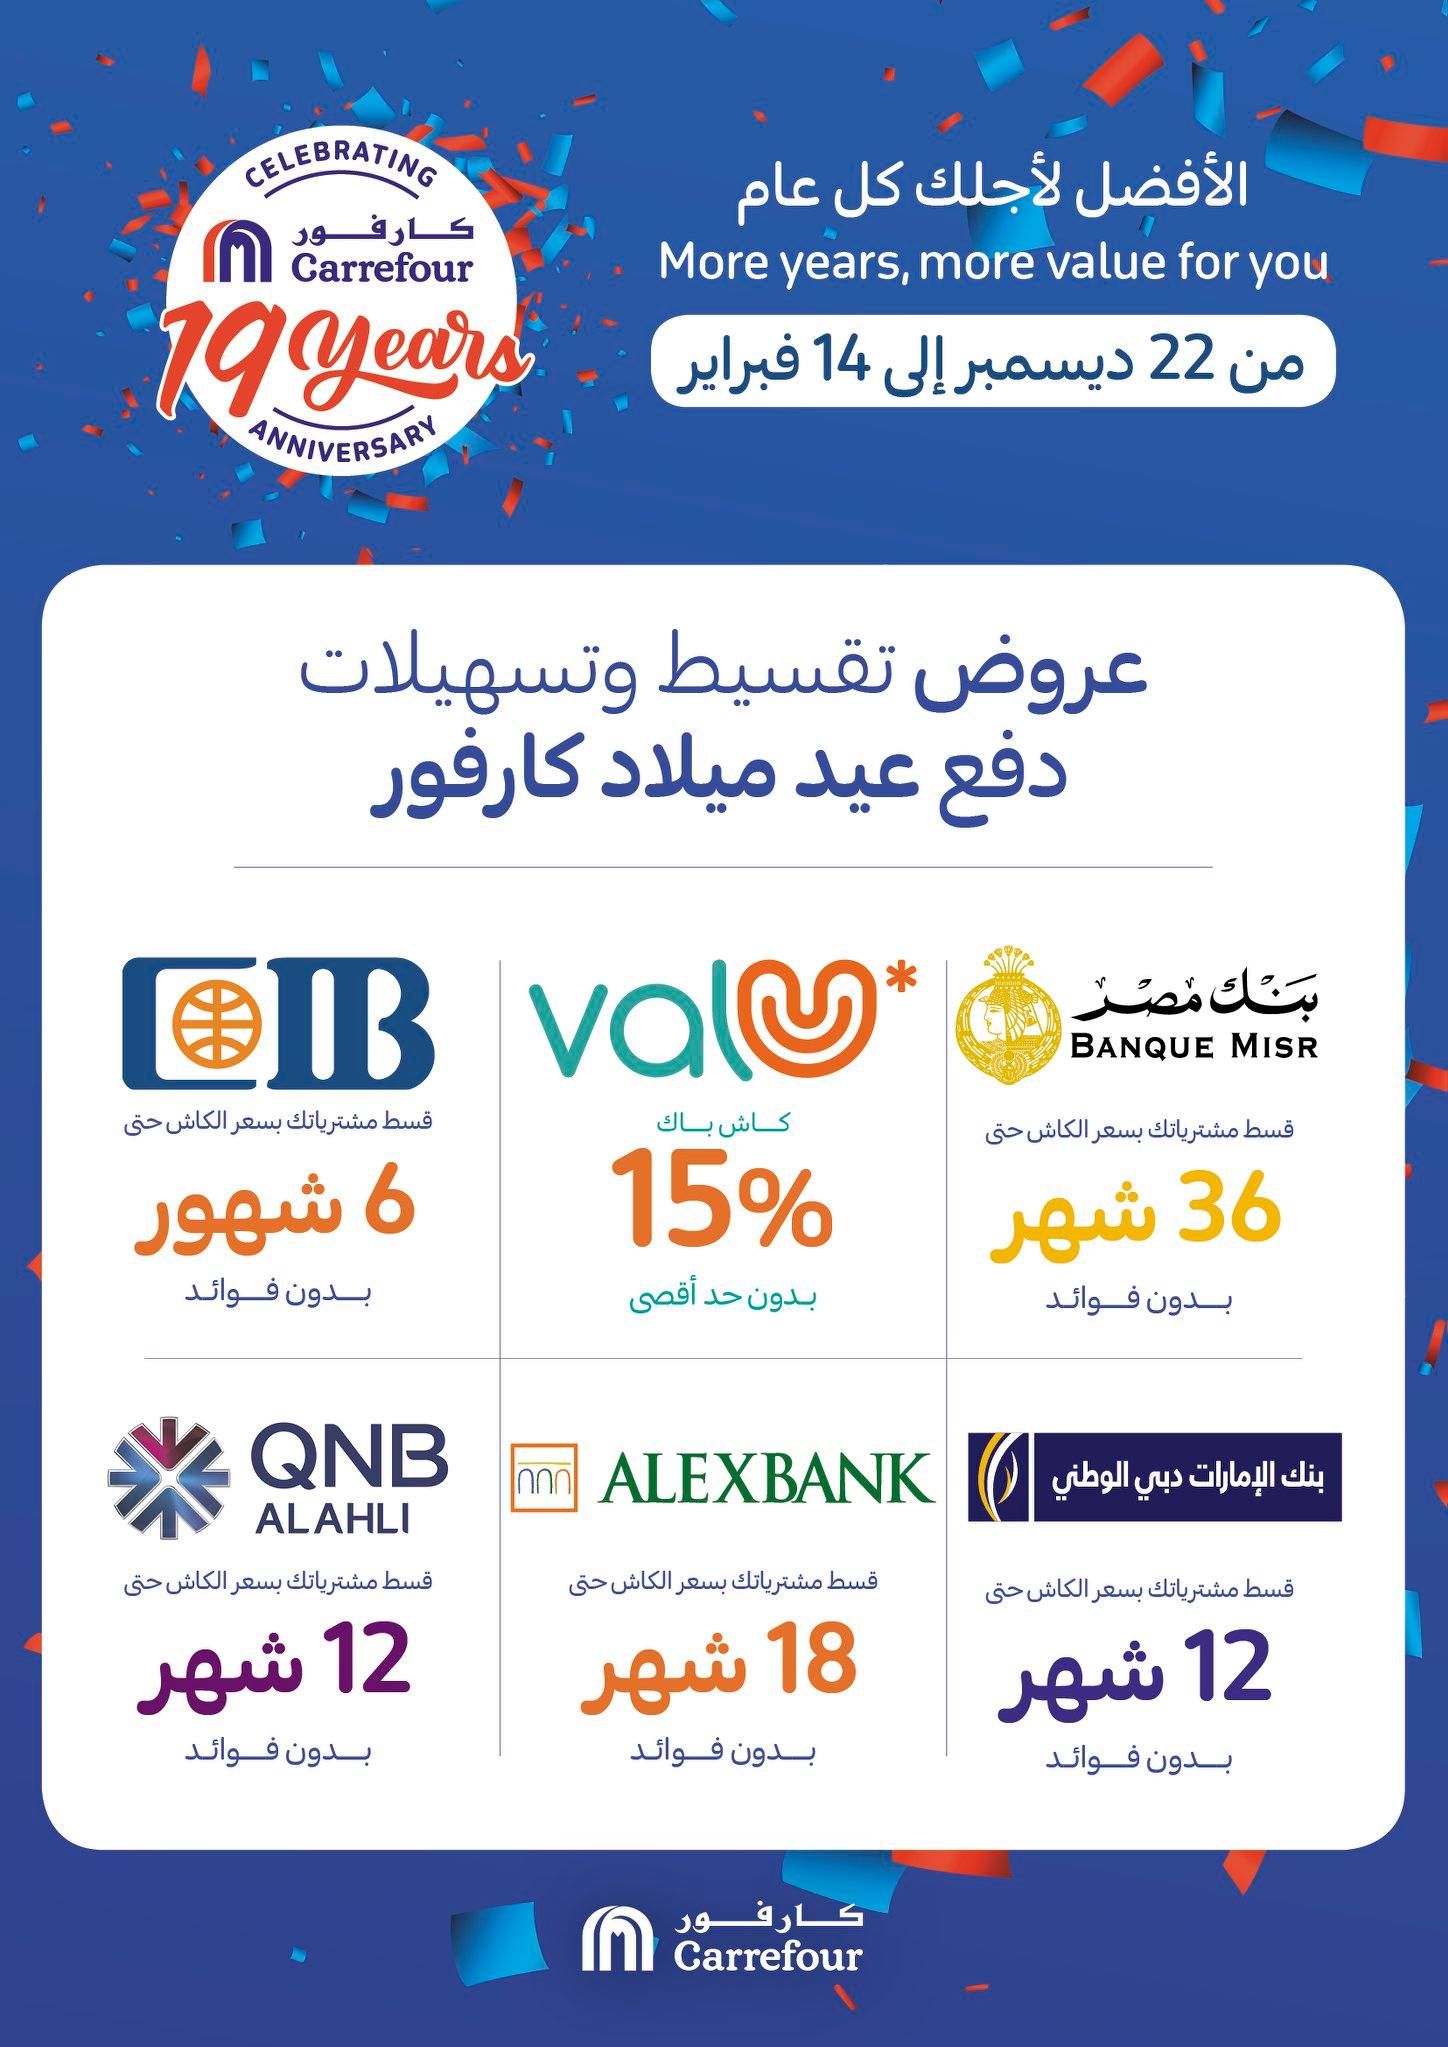 Carrefour prices for refrigerators and freezers today, Carrefour 19 birthday offers and gifts 2